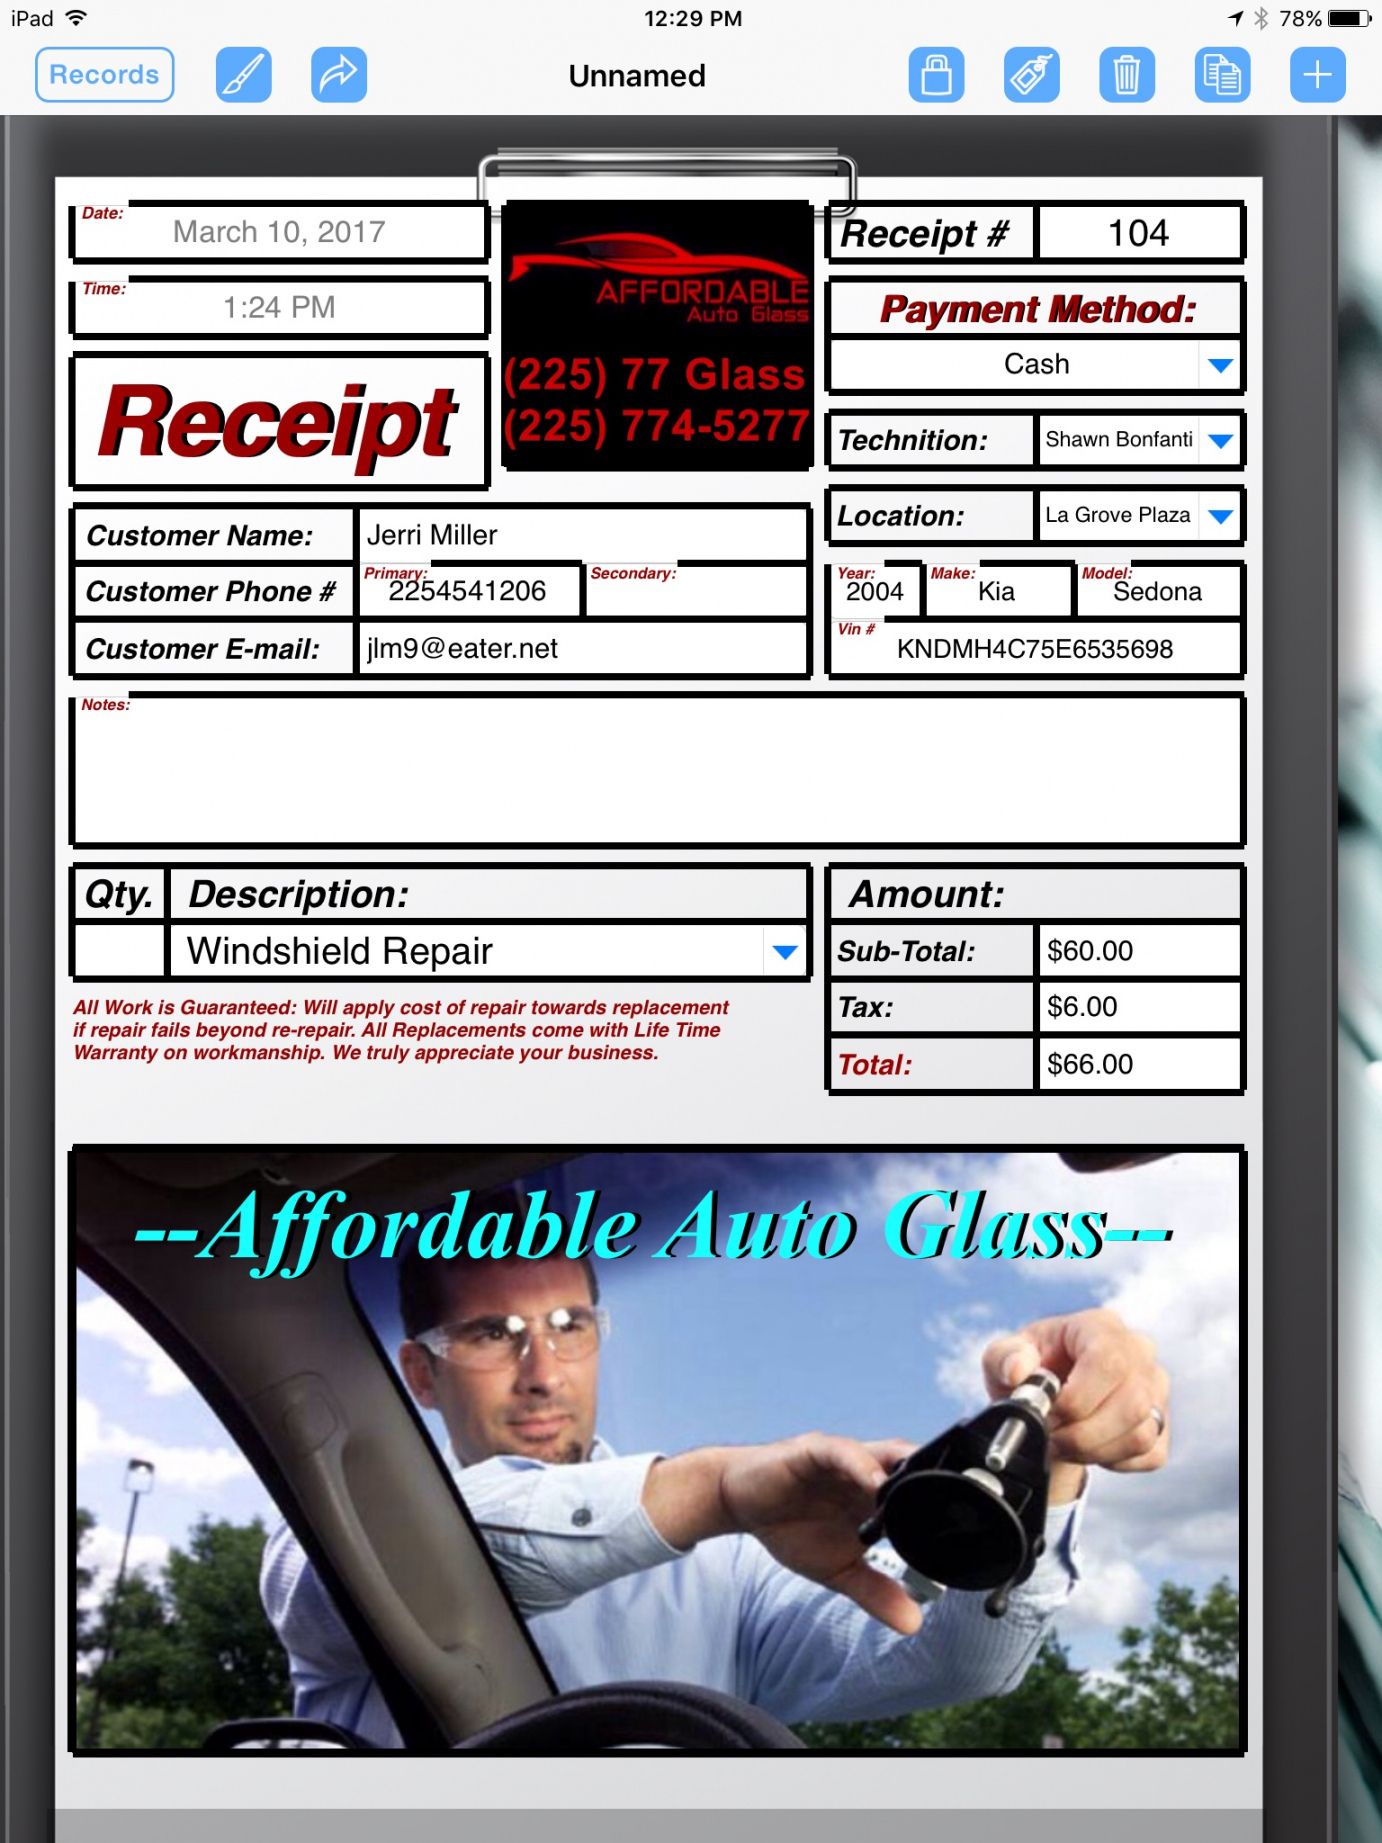 auto glass repairer uses ipad to go paperless  form connections auto glass invoice template